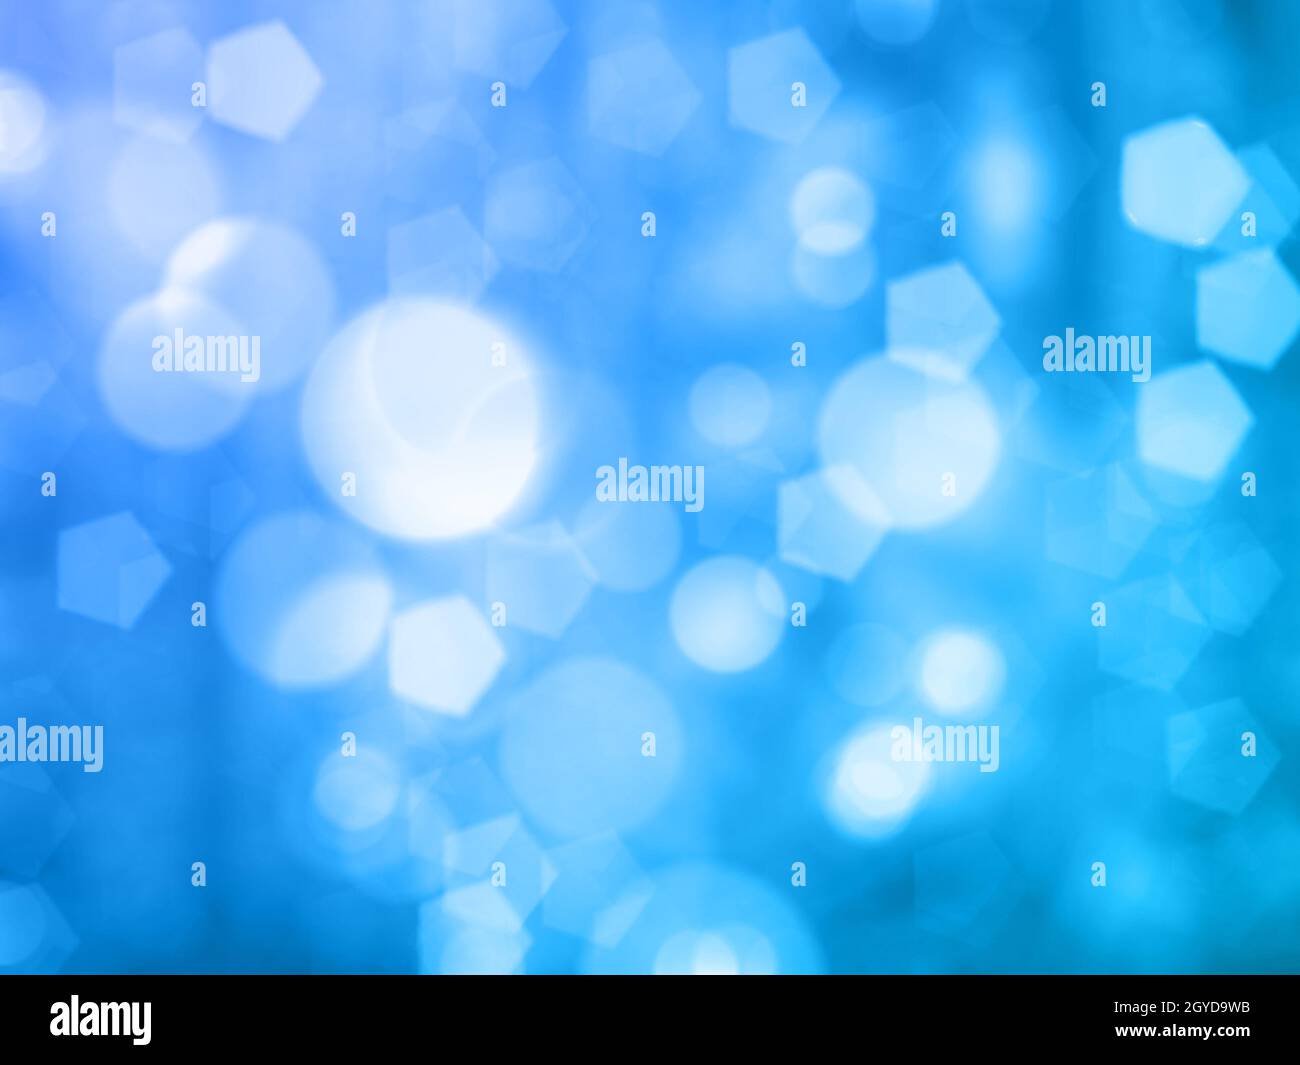 Decorative background with bokeh lights design Stock Photo